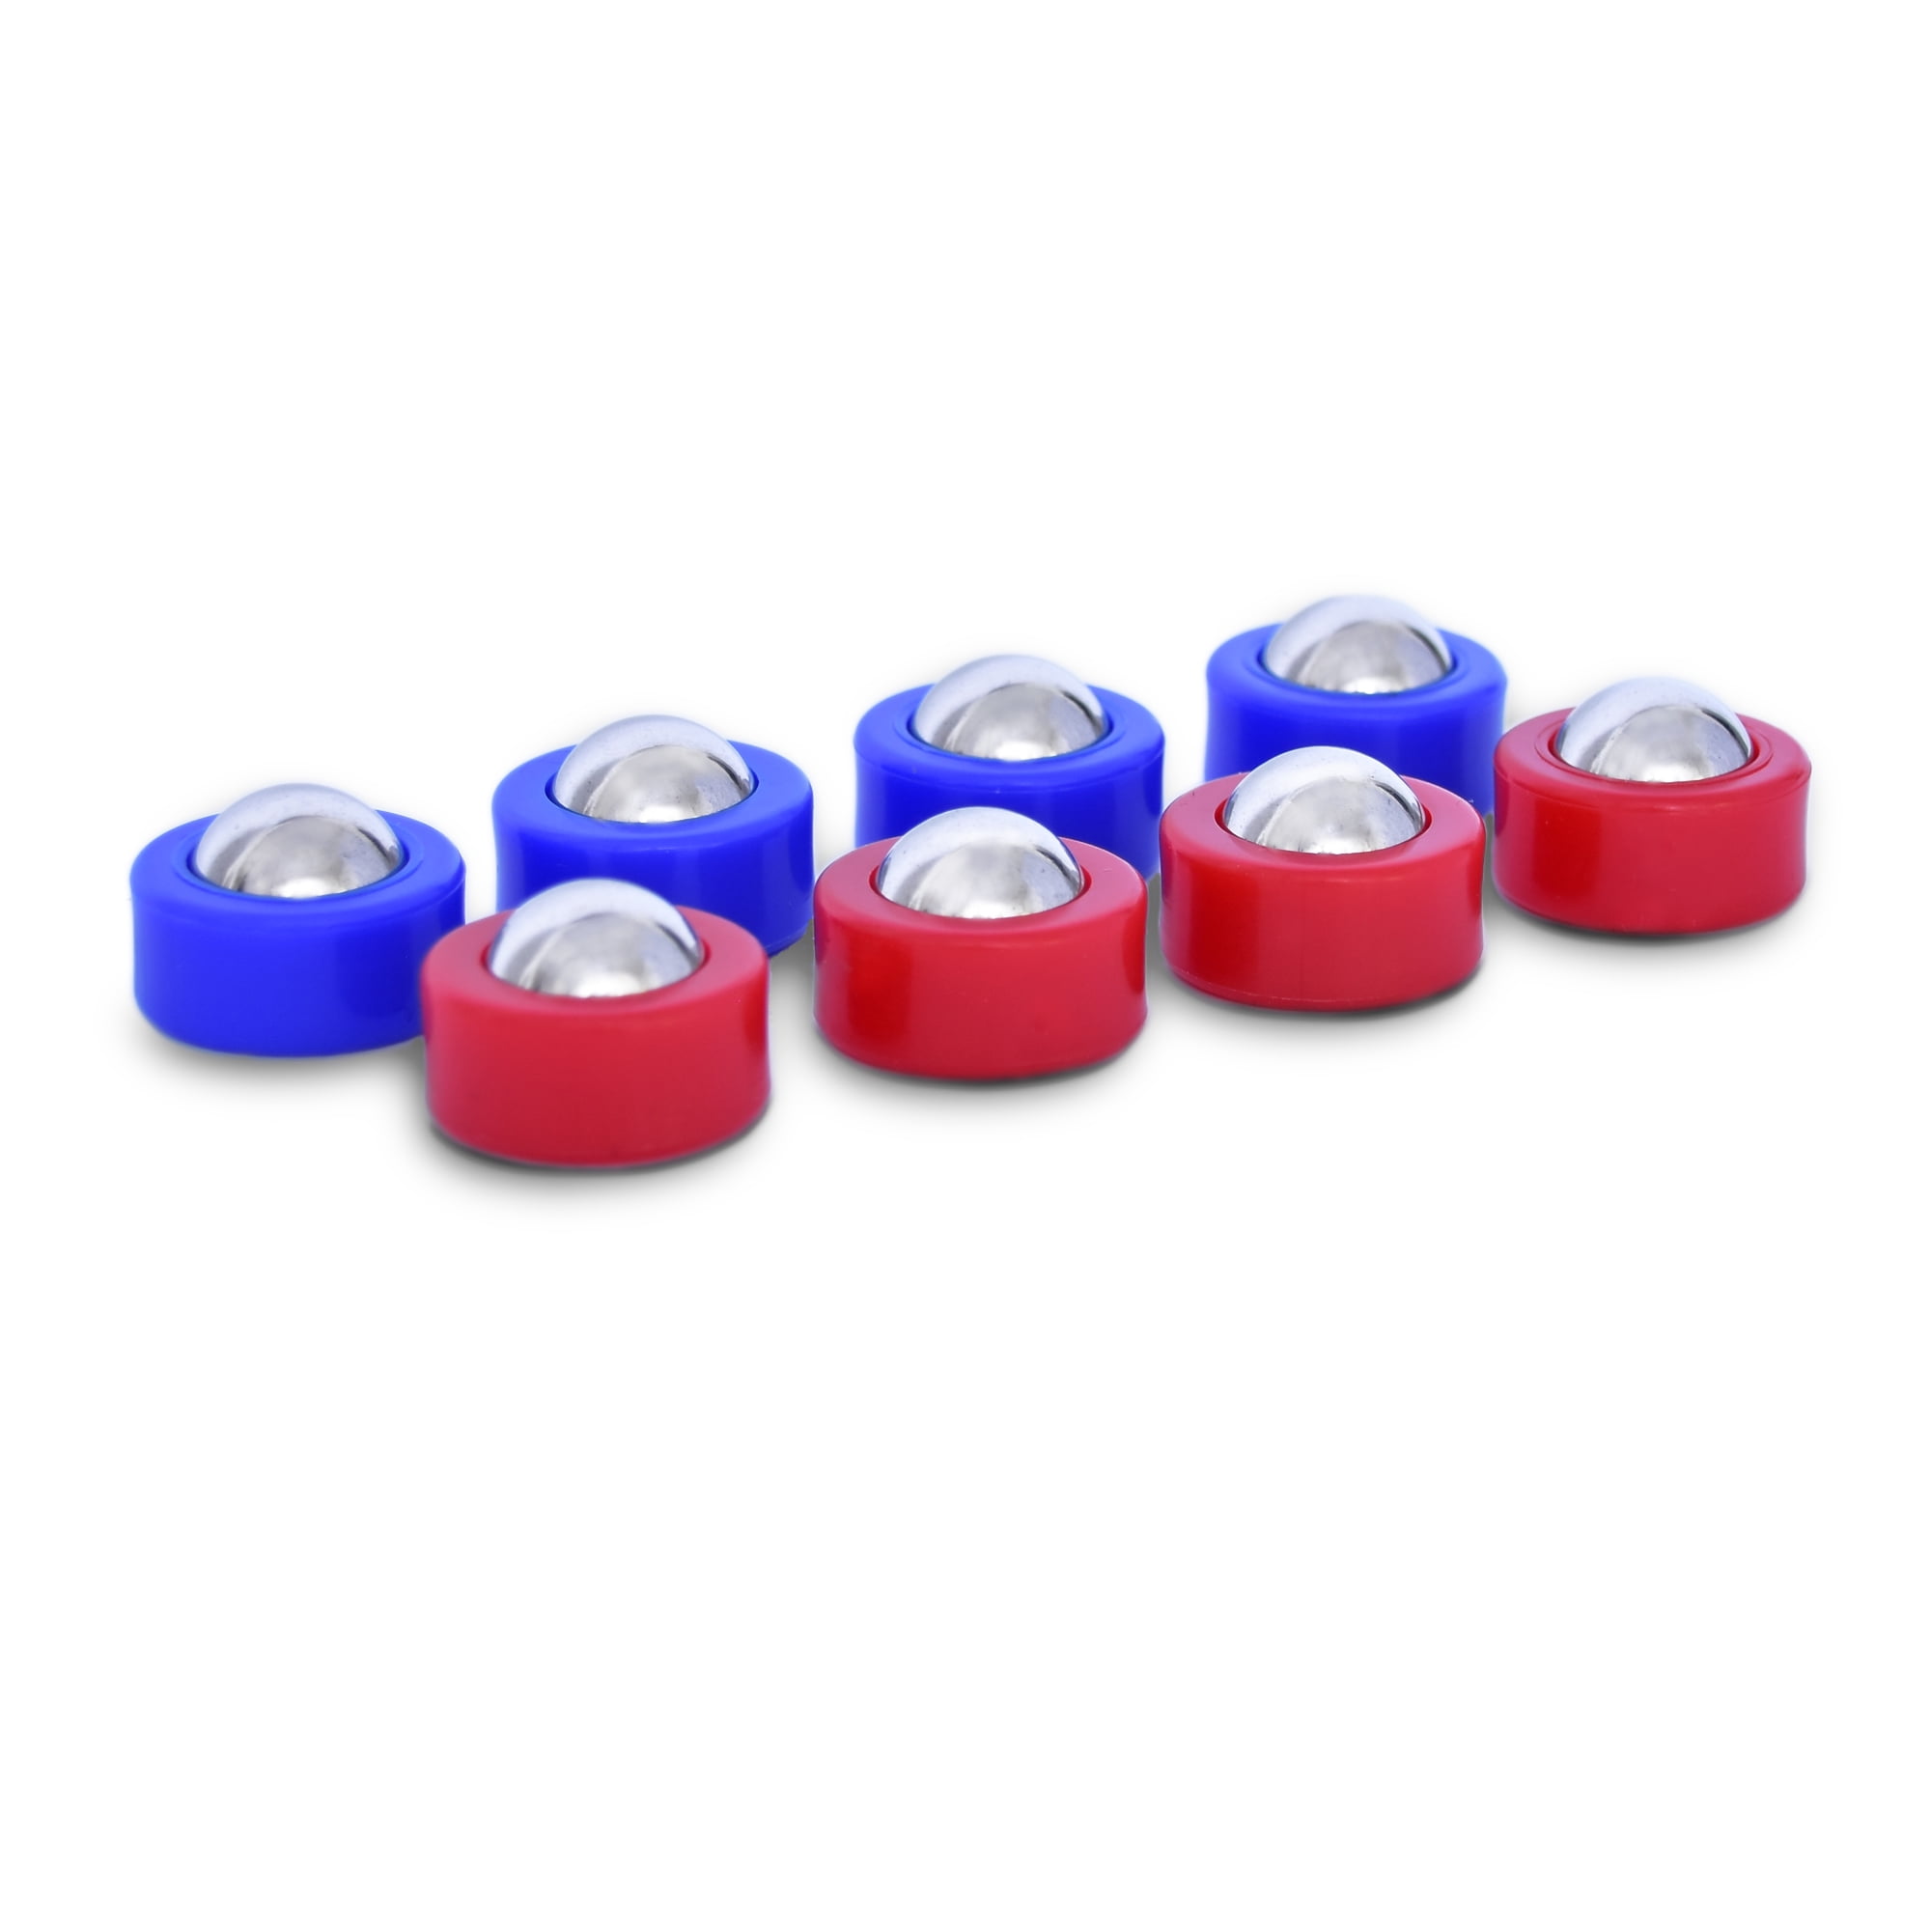 Shuffle Board Tabletop Game Mini Roller Pucks Replacement Set of 8 Roller Balls 